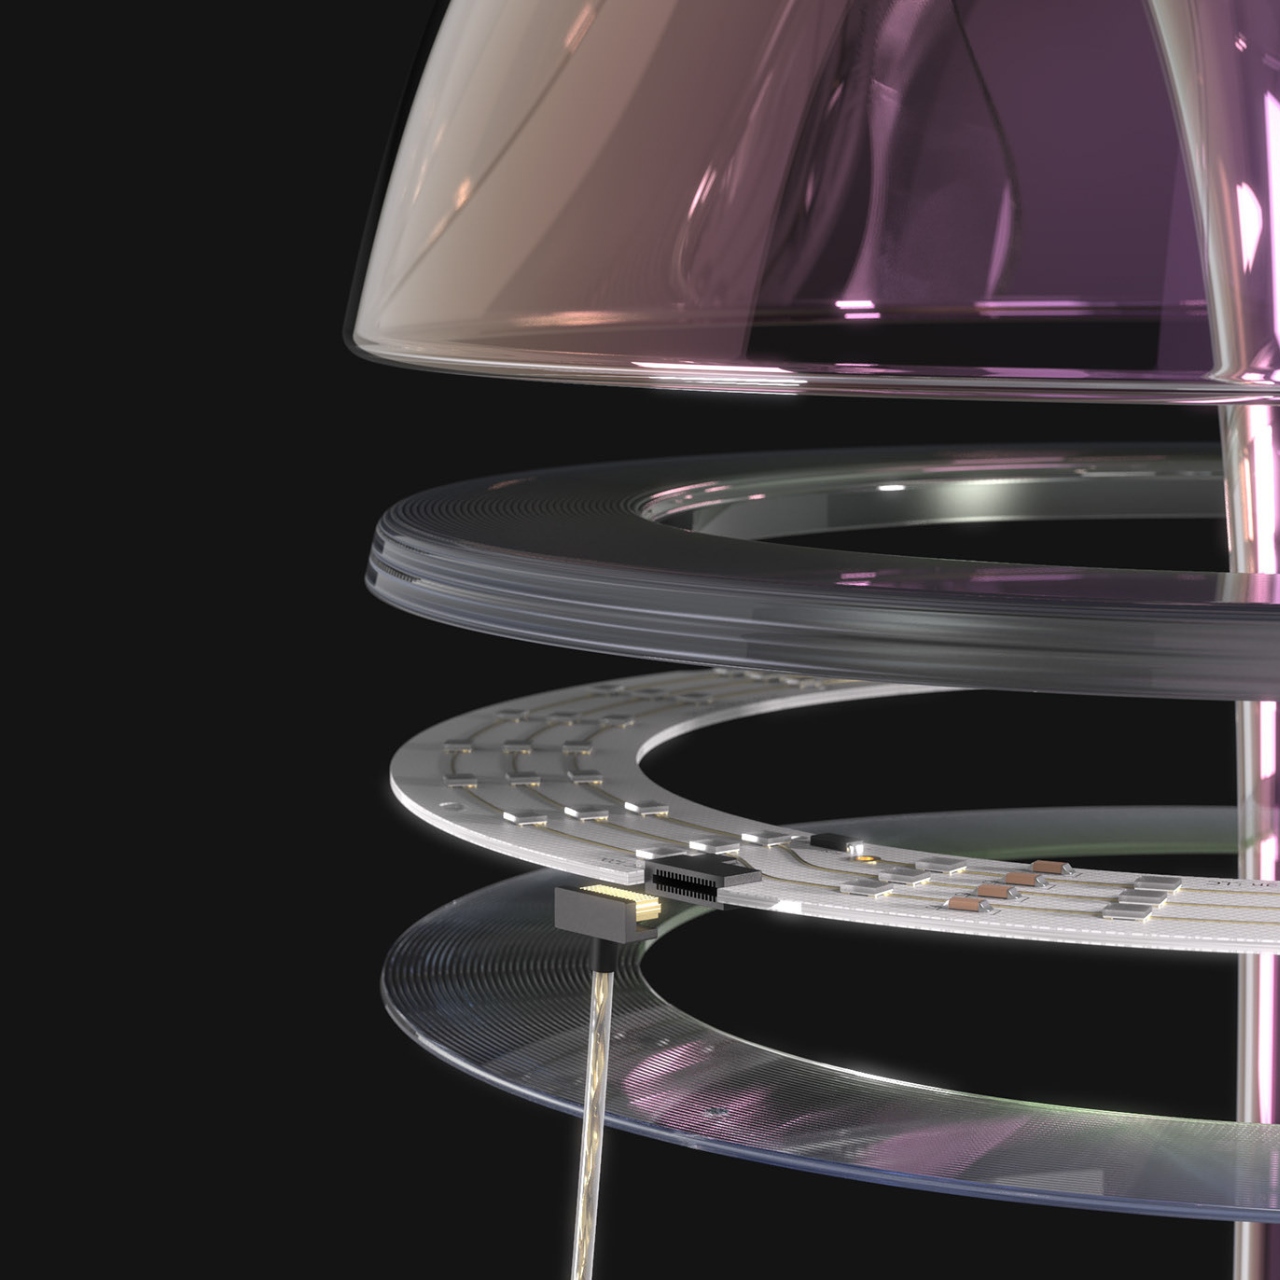 This wormhole-inspired table lamp design makes a great addition to the interiors of every space enthusiast